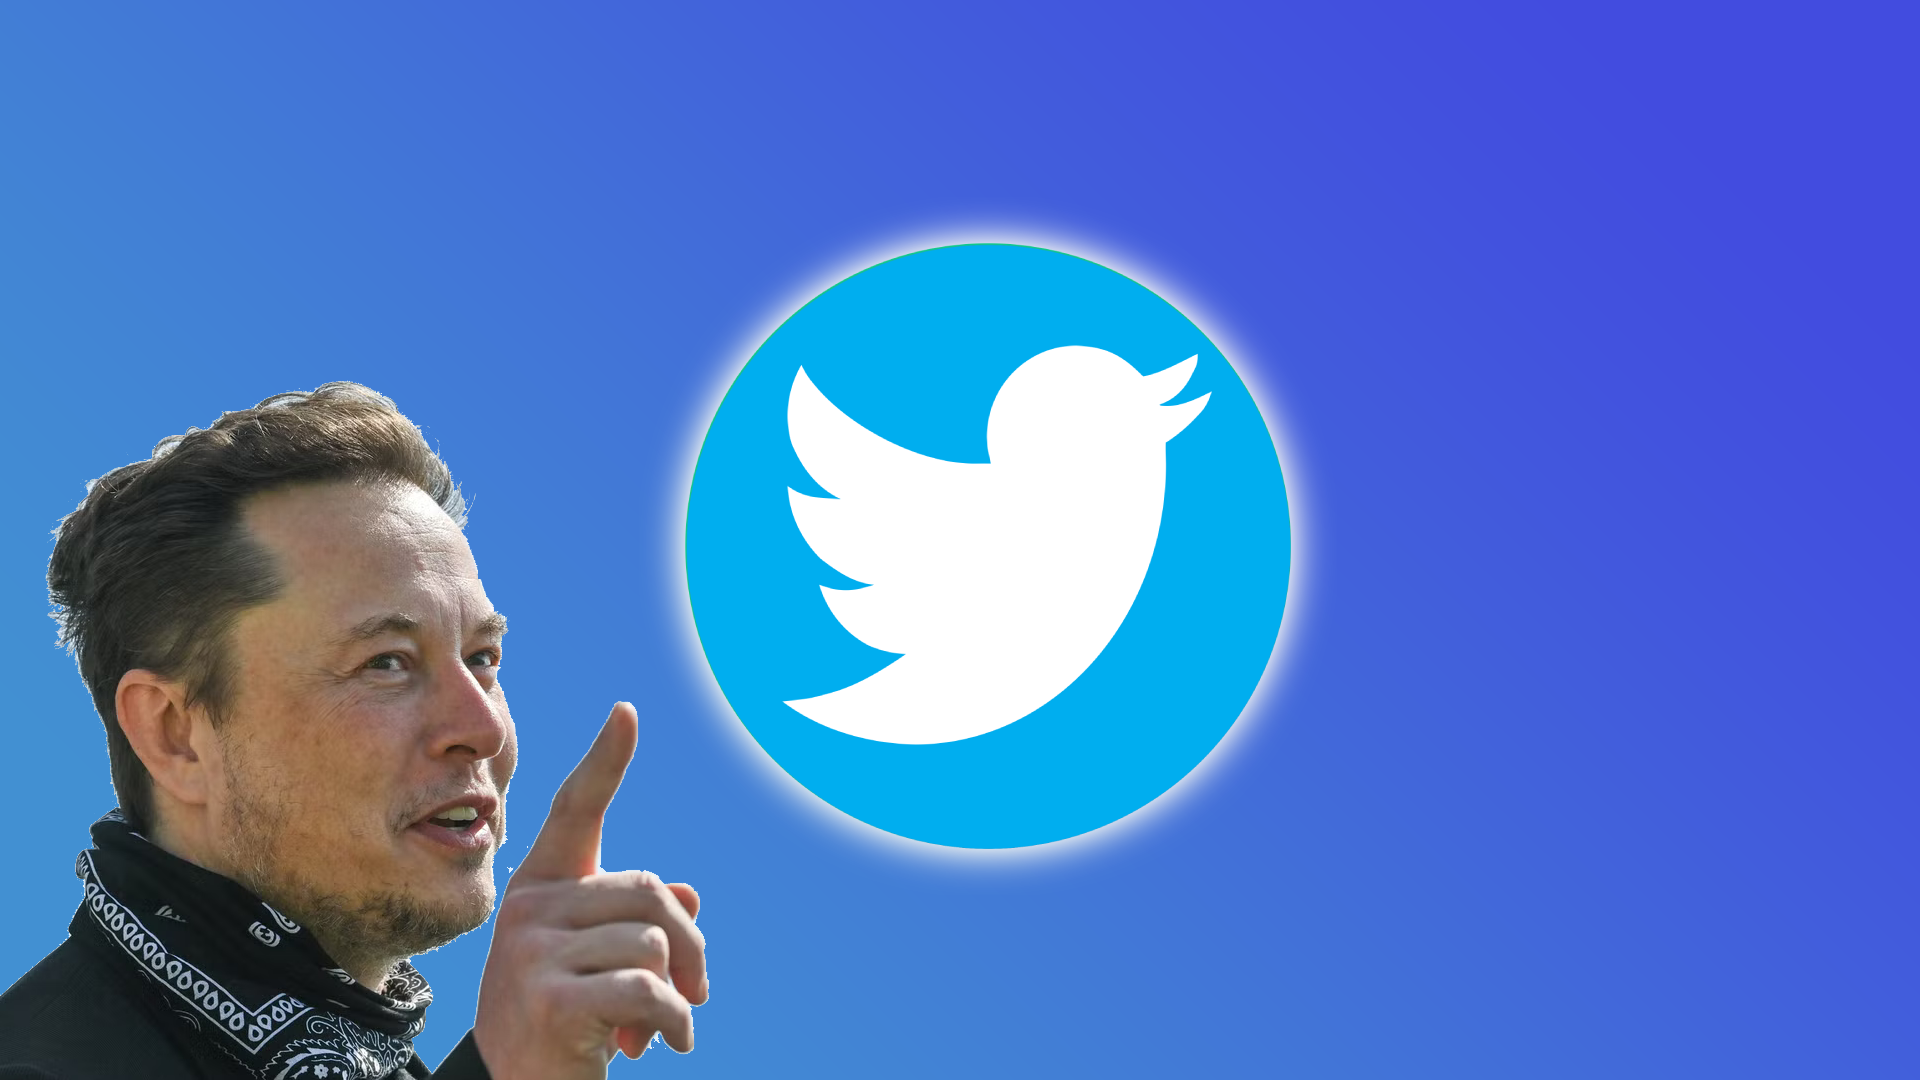 Elon Musk plans to resign as head of Twitter